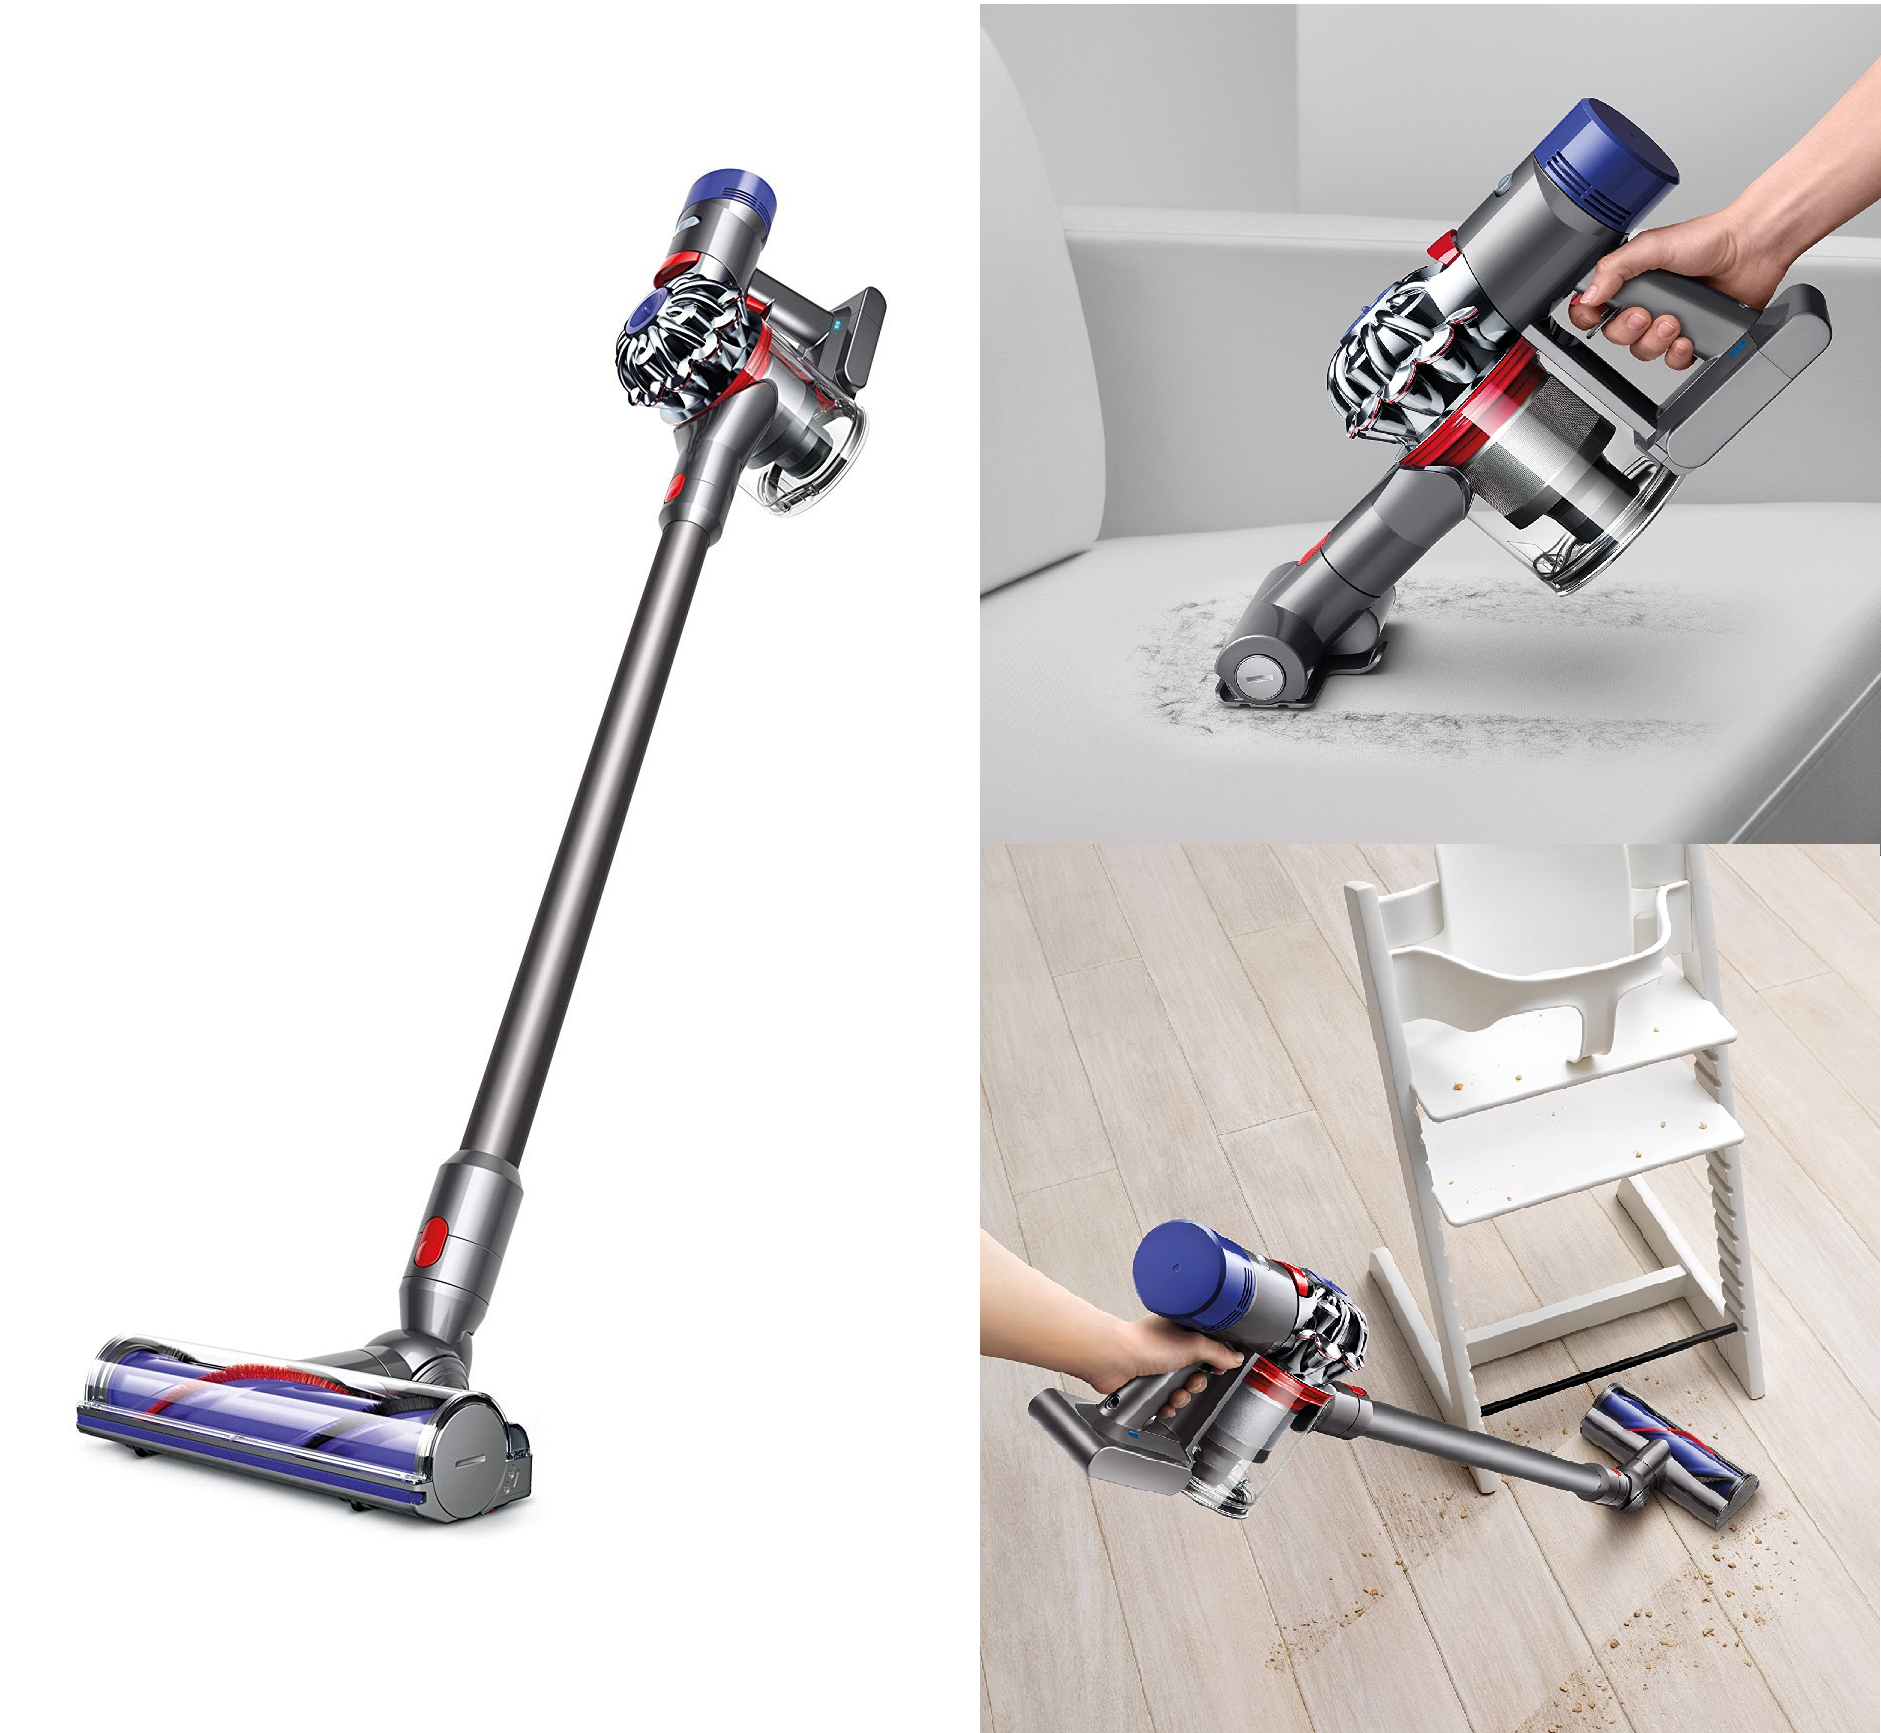 Advantages of Using a Dyson V7 Stick Vacuum Cleaner